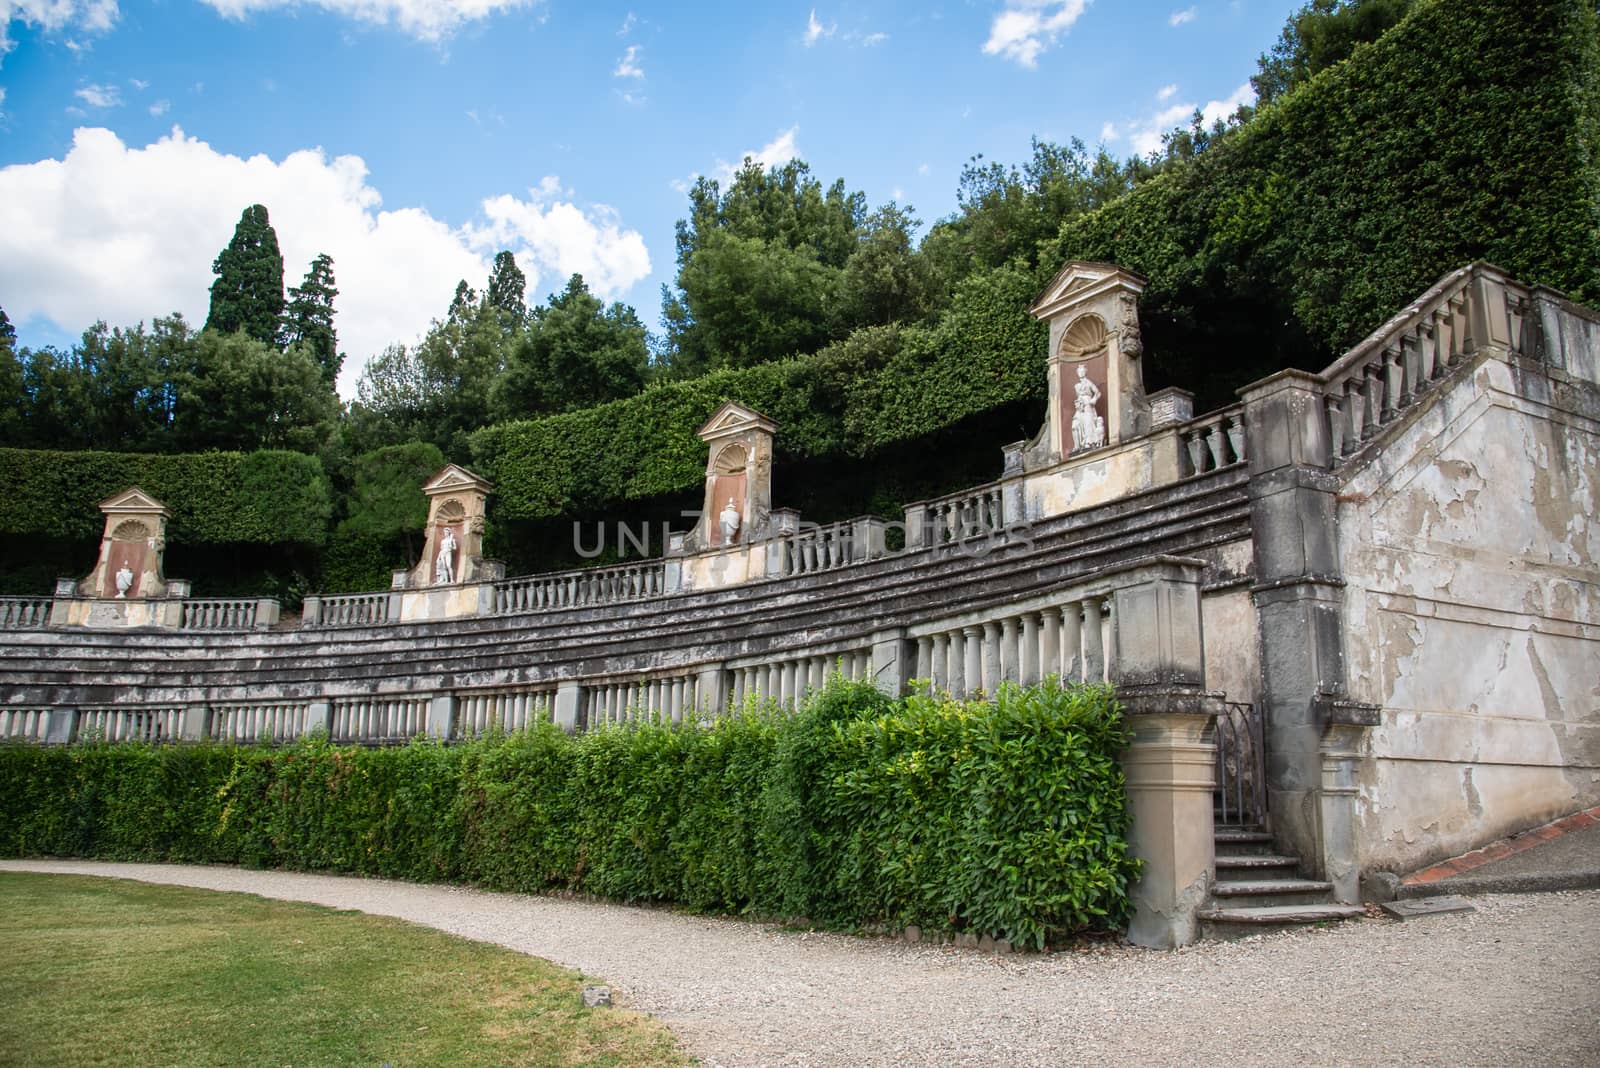 Particularly of the colonnade and the statues of the Boboli Gard by LarisaP